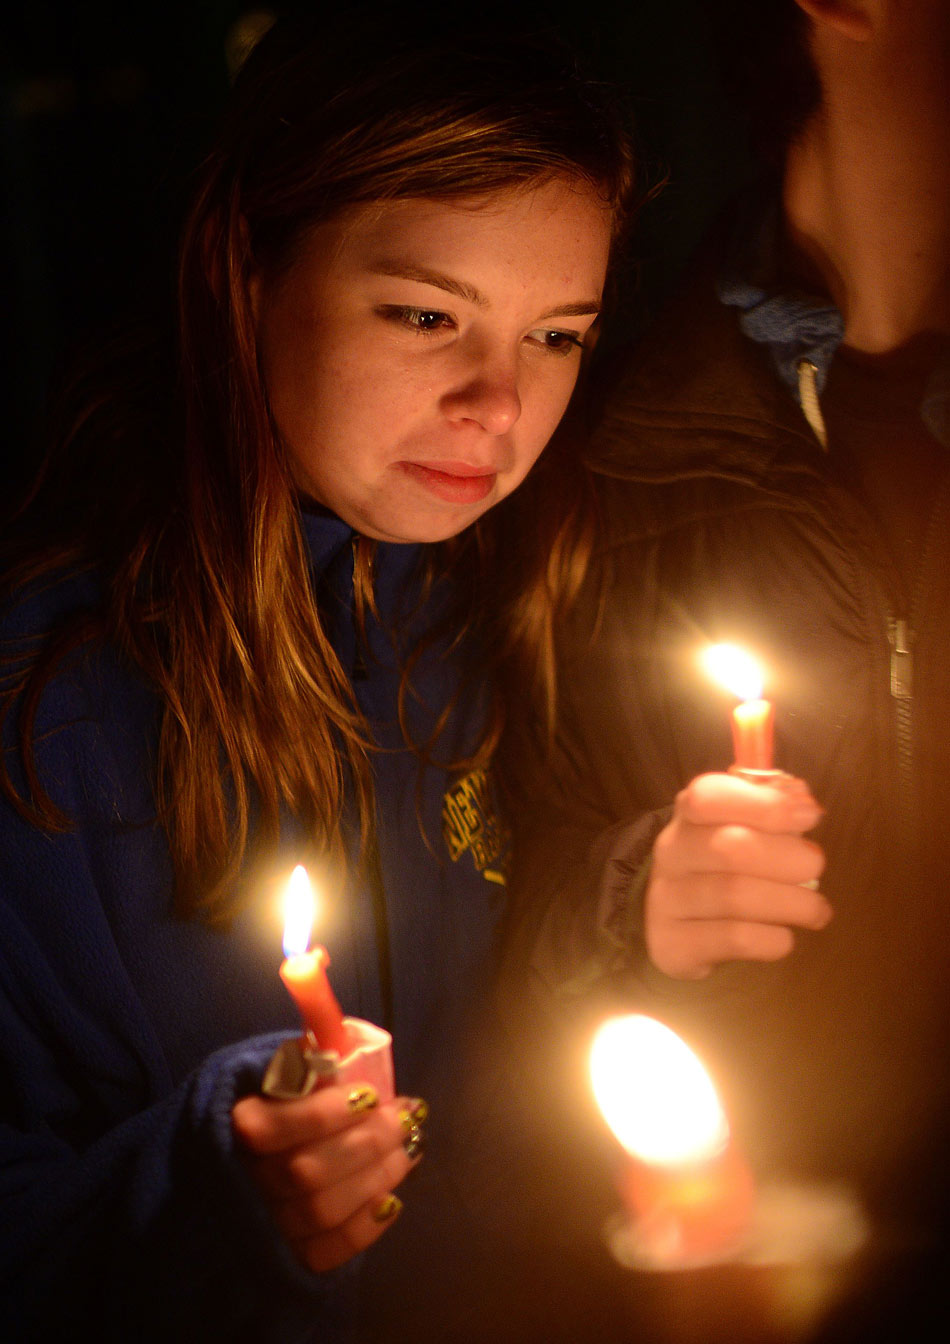 A little girl holds a candle to pay tribute to the victims of the Sandy Hook Elementary School massacre in Connecticut, U.S., Dec. 16, 2012. (Xinhua/AFP)